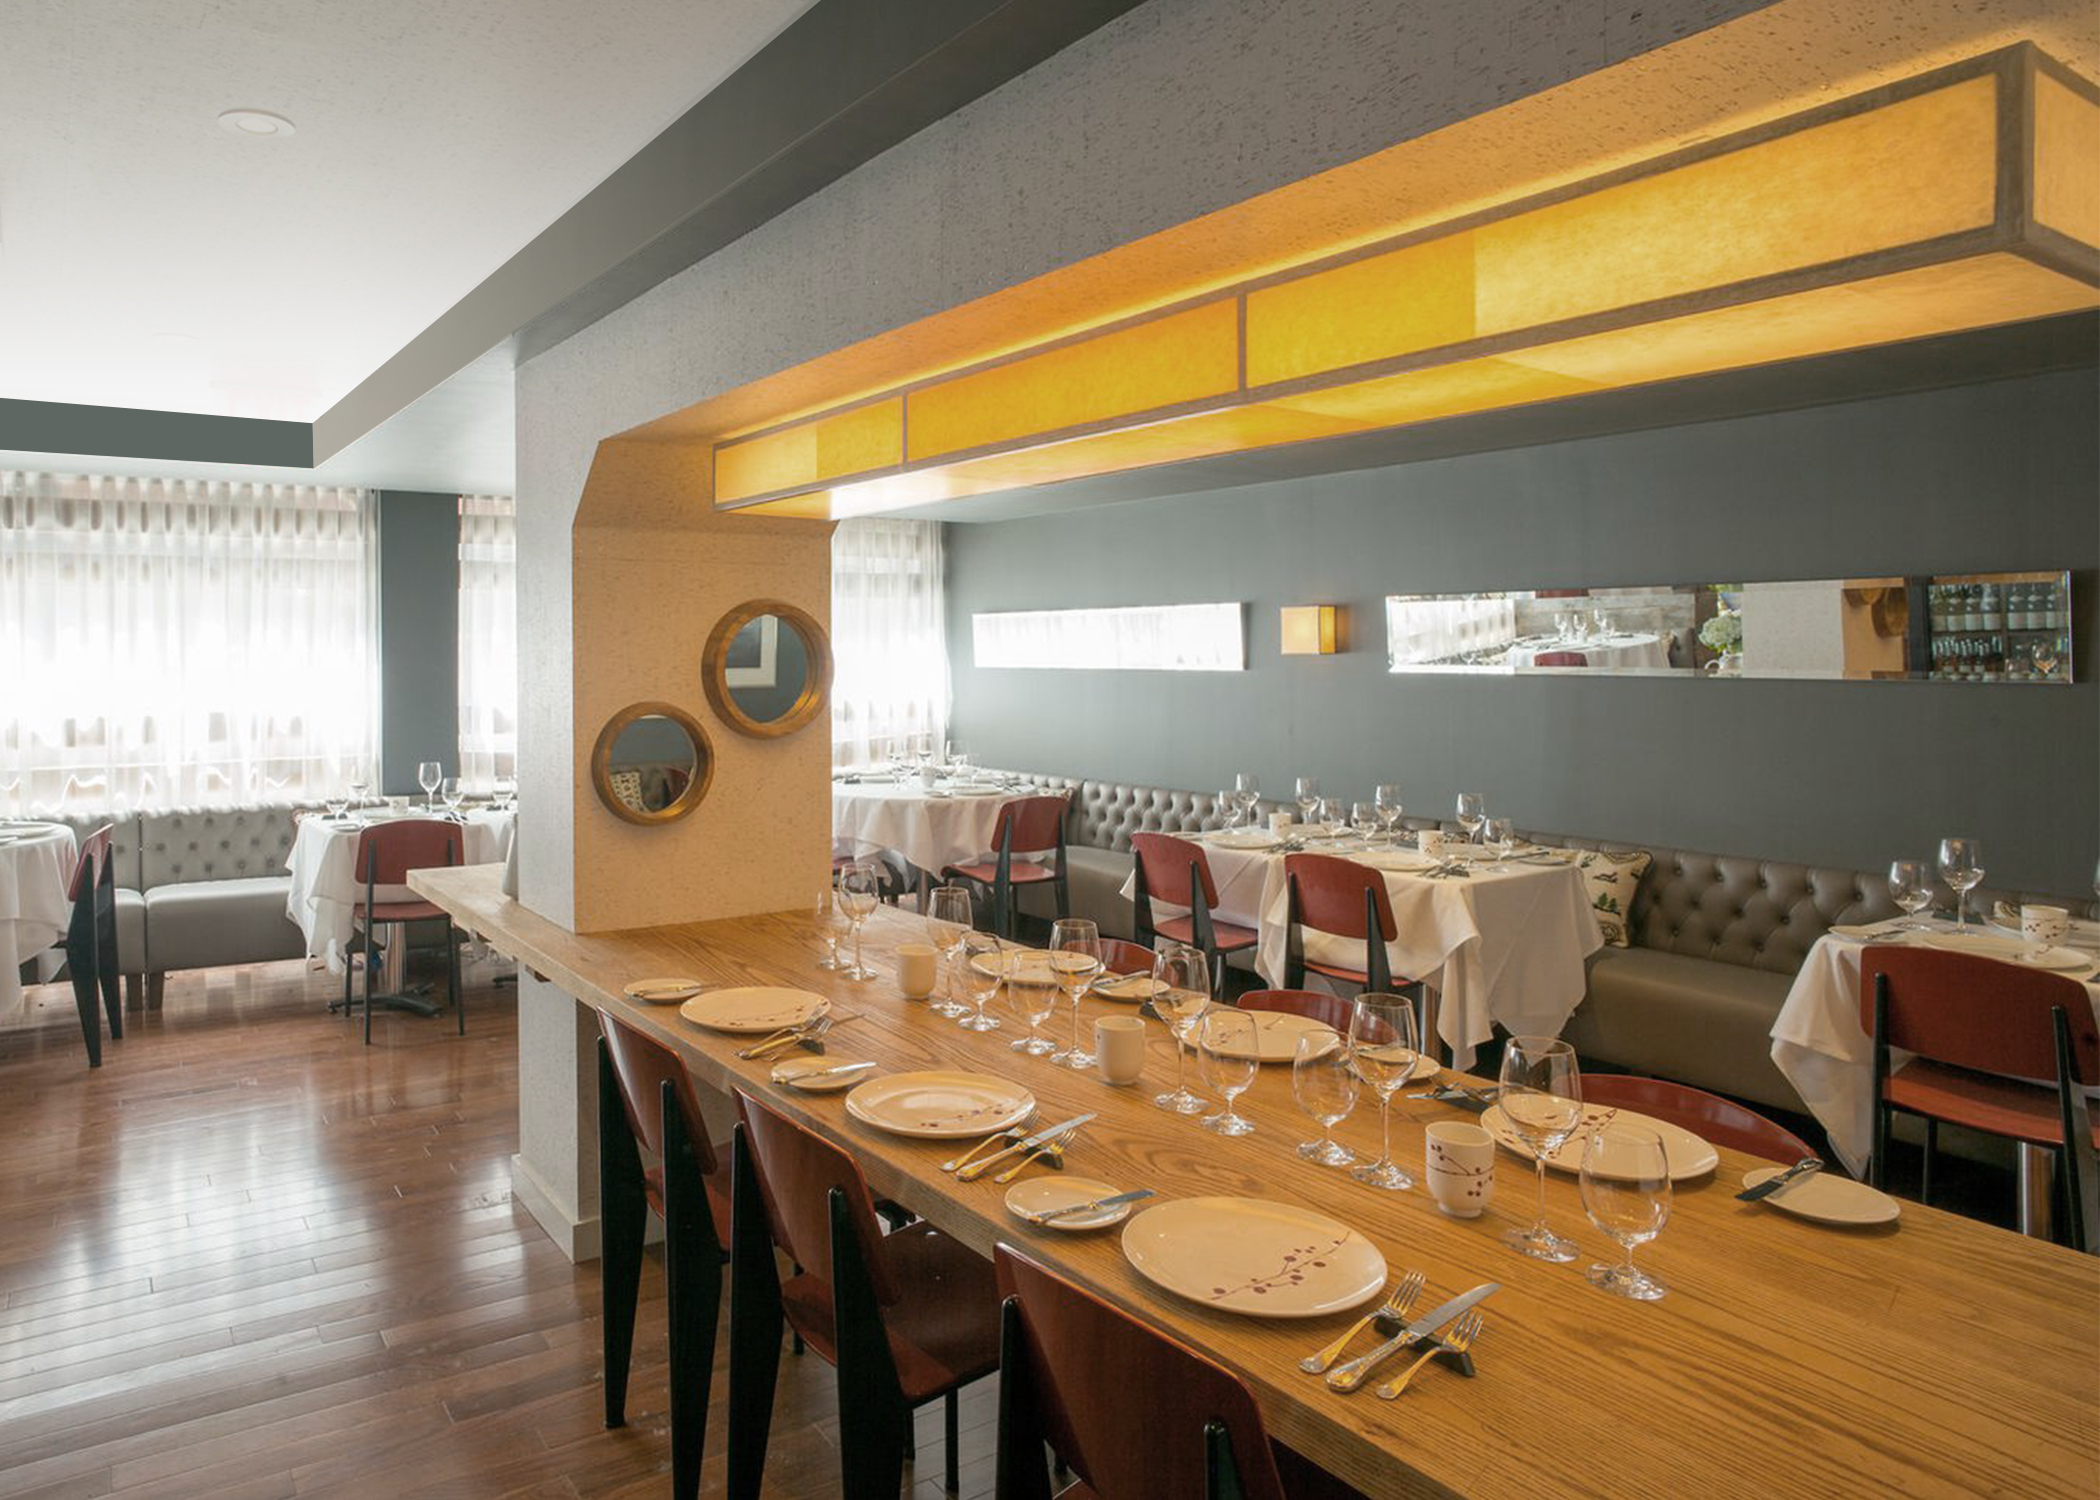 The main dining space was refreshed with a central floating oak farm table, cork wall/ceiling linings and carefully located lighting, mirrors and artwork for an elevated fine dining experience.